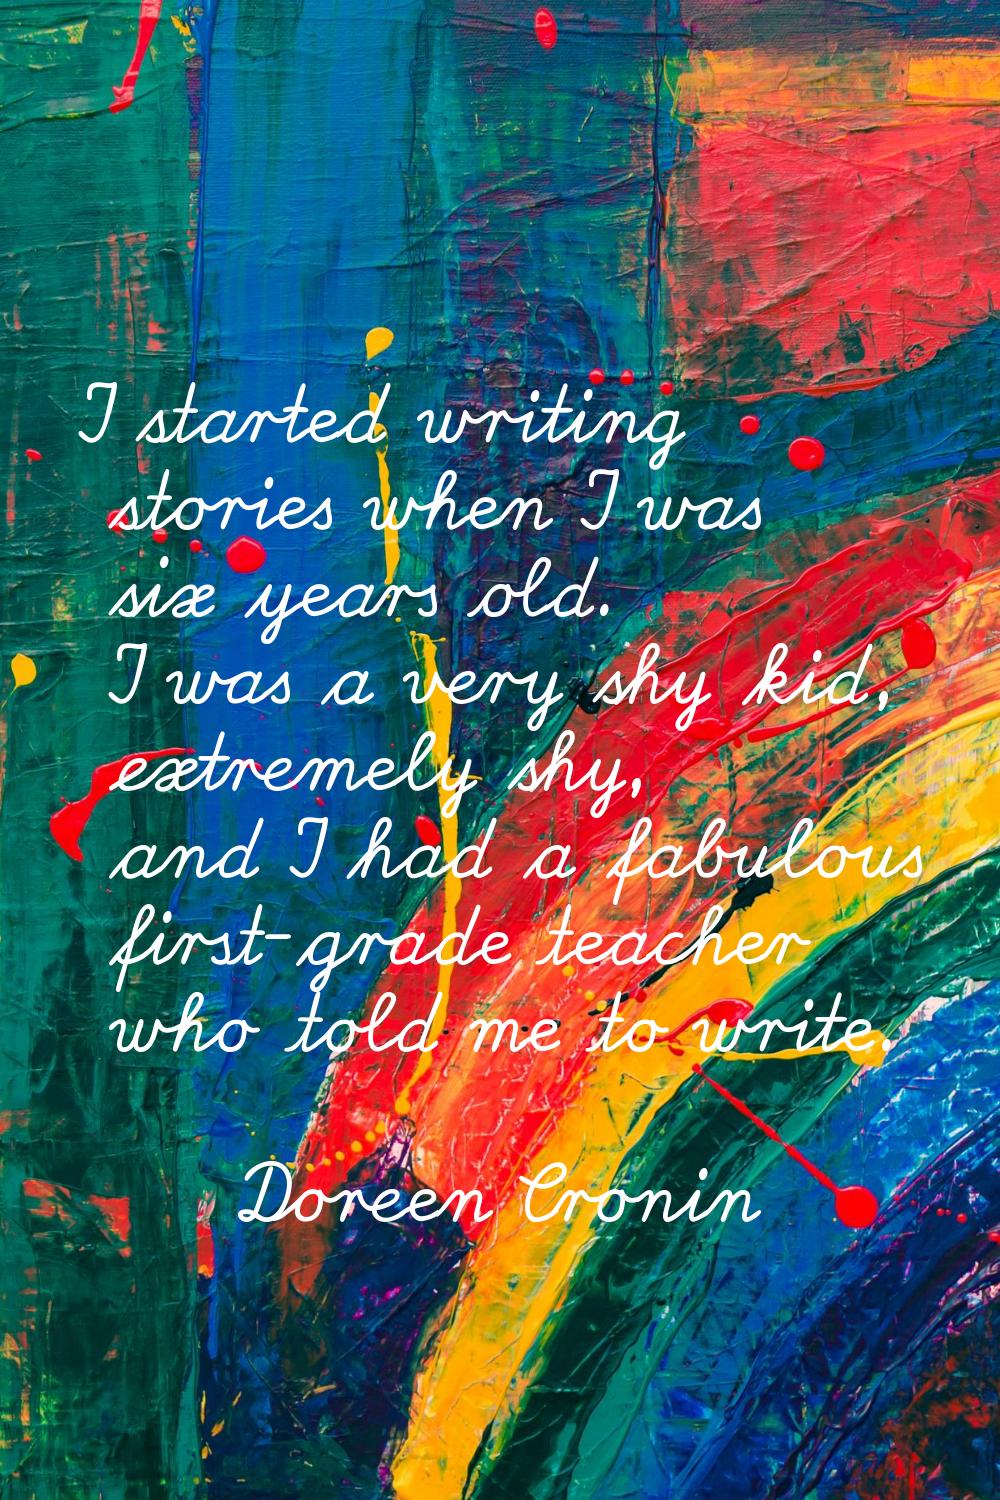 I started writing stories when I was six years old. I was a very shy kid, extremely shy, and I had 